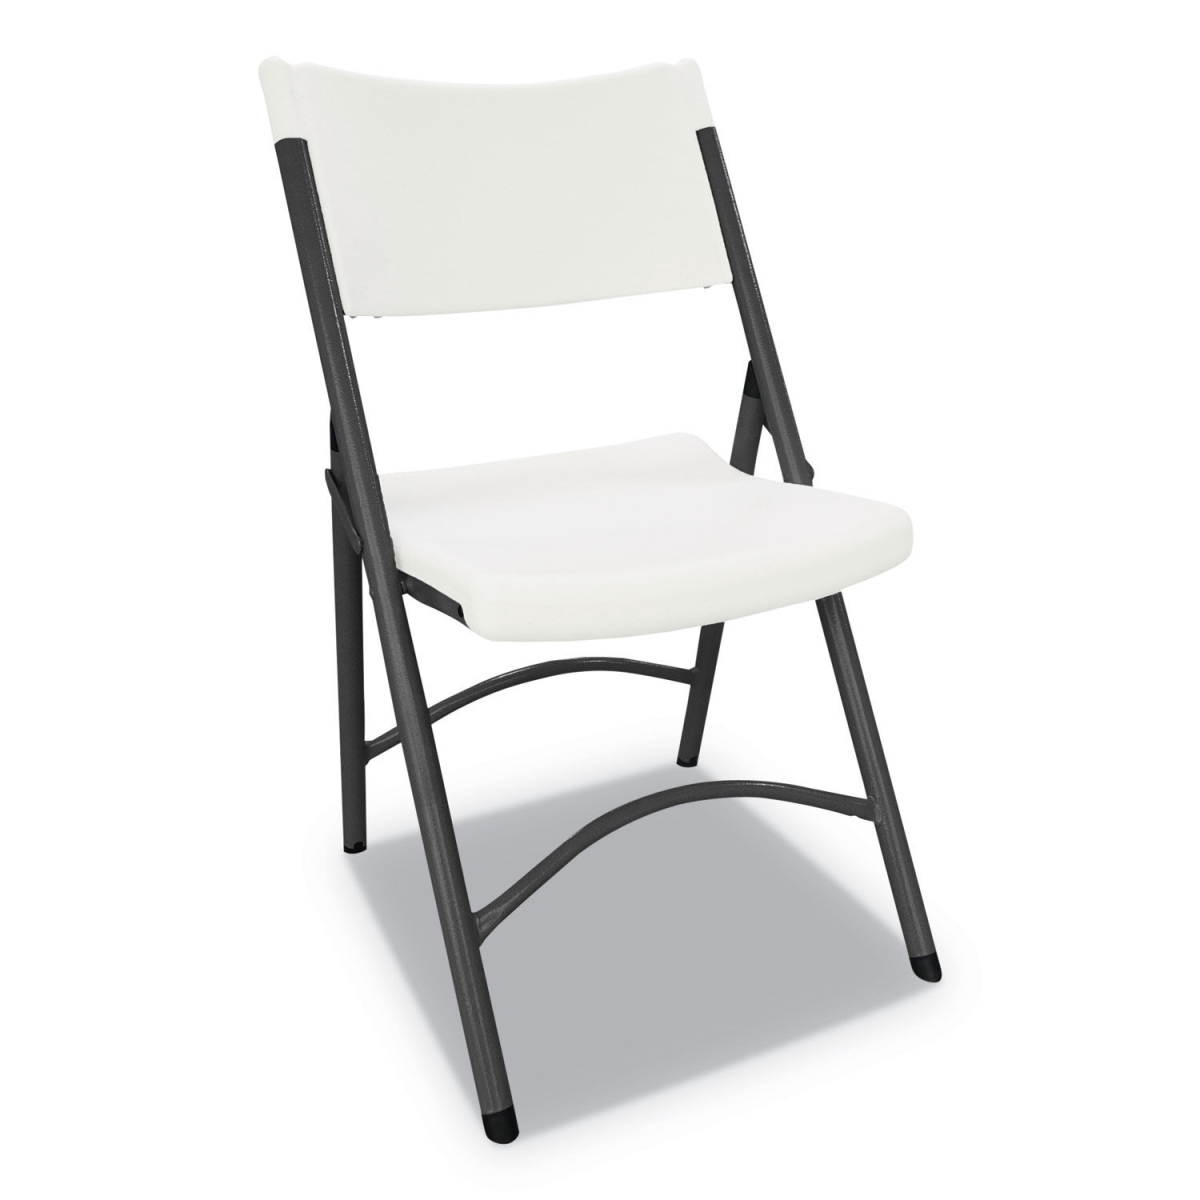 Picture of Alera ALEFR9302 Premium Blow Molded Resin Folding Chair, White